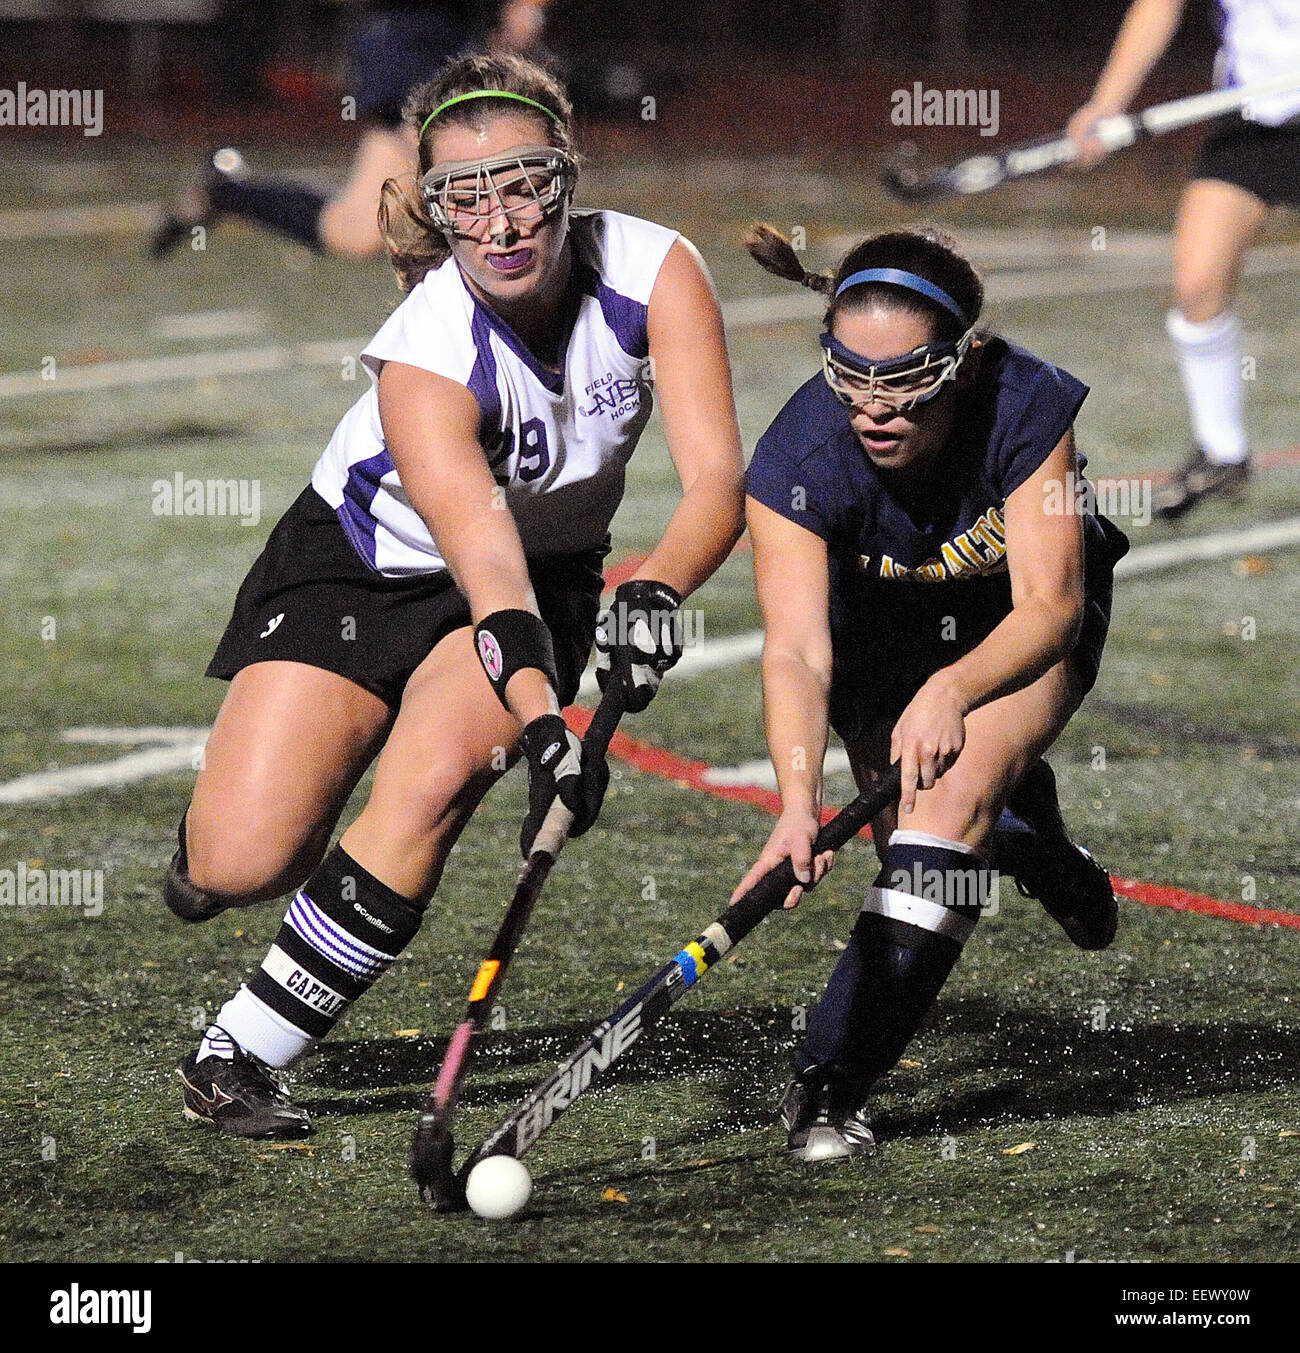 Guilford, CT USA-- North Branford's Meagan Halligan, left, and Lauralton Hall's Christina Gould battle for a midfield ball during the first half .     11/15/11 Stock Photo